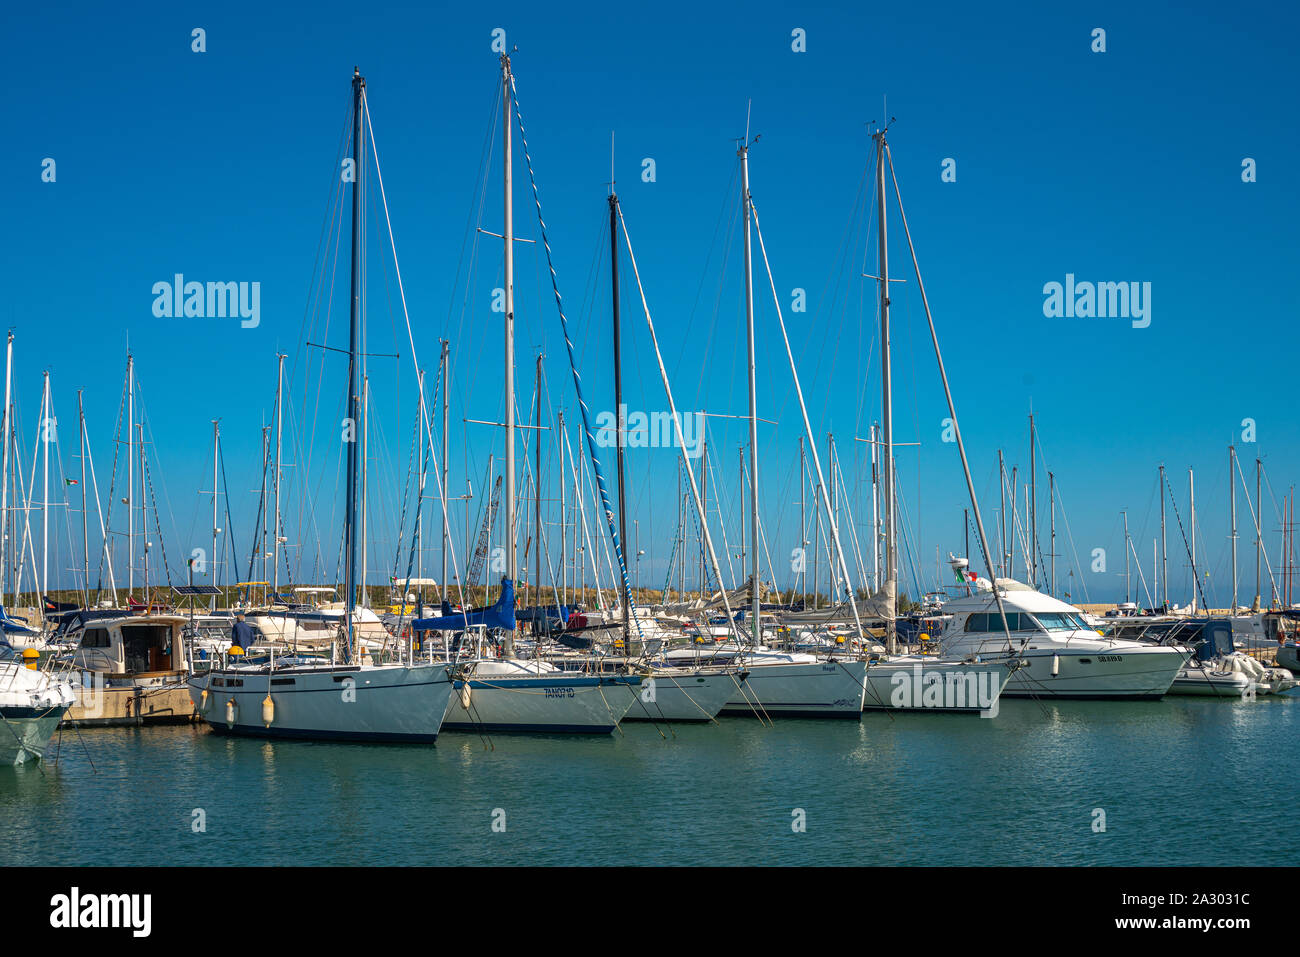 View of the Pescara tourist harbor with sail boats and yachts anchored Stock Photo